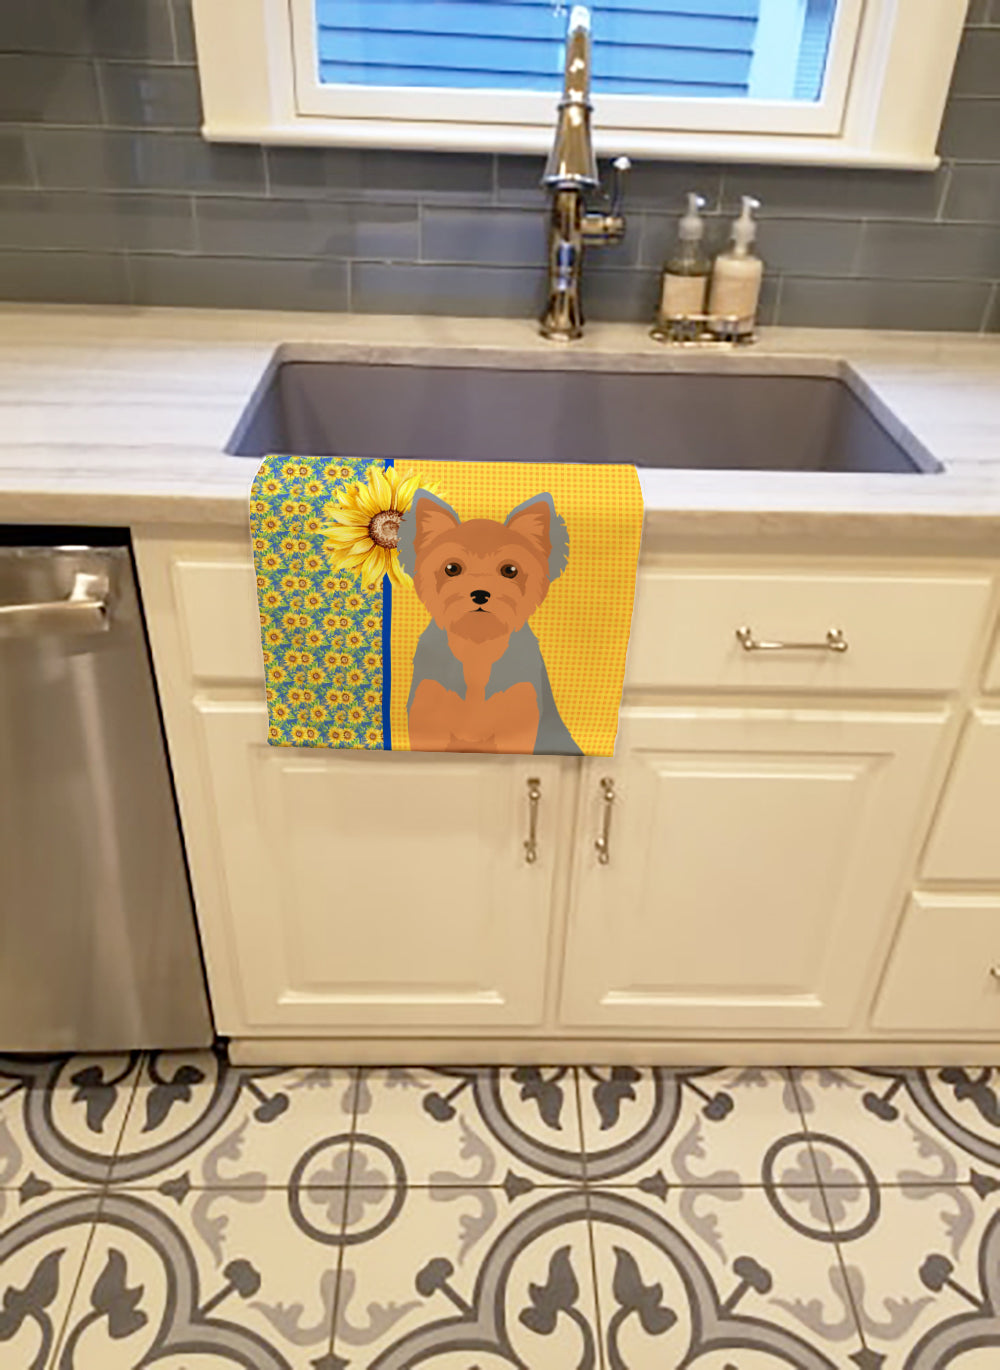 Buy this Summer Sunflowers Blue and Tan Puppy Cut Yorkshire Terrier Kitchen Towel